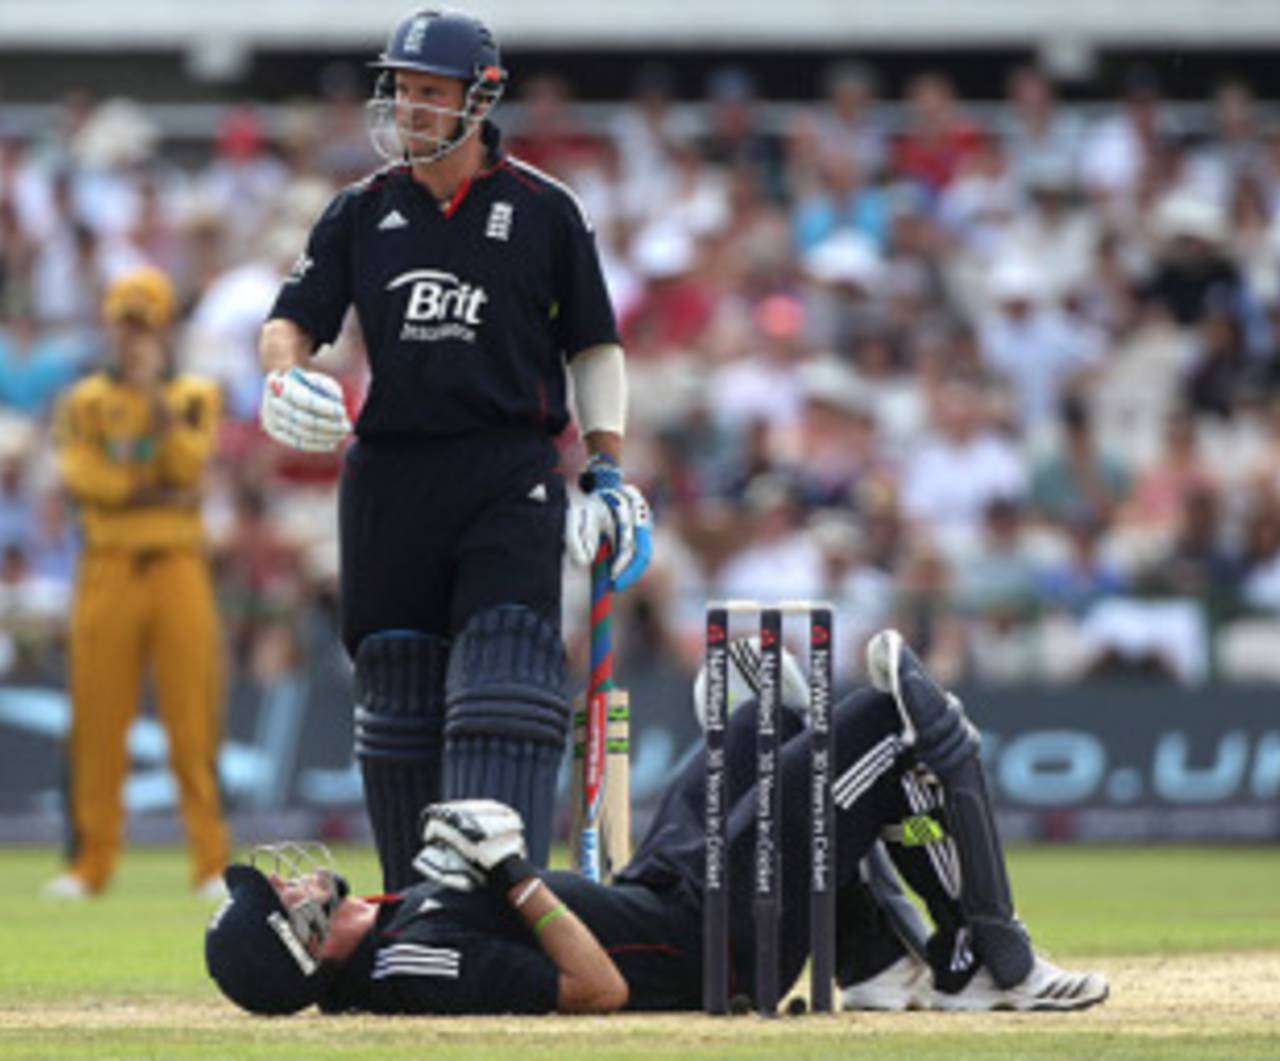 It's been an uncomfortable series for Kevin Pietersen despite him showing flashes of his best form&nbsp;&nbsp;&bull;&nbsp;&nbsp;Getty Images